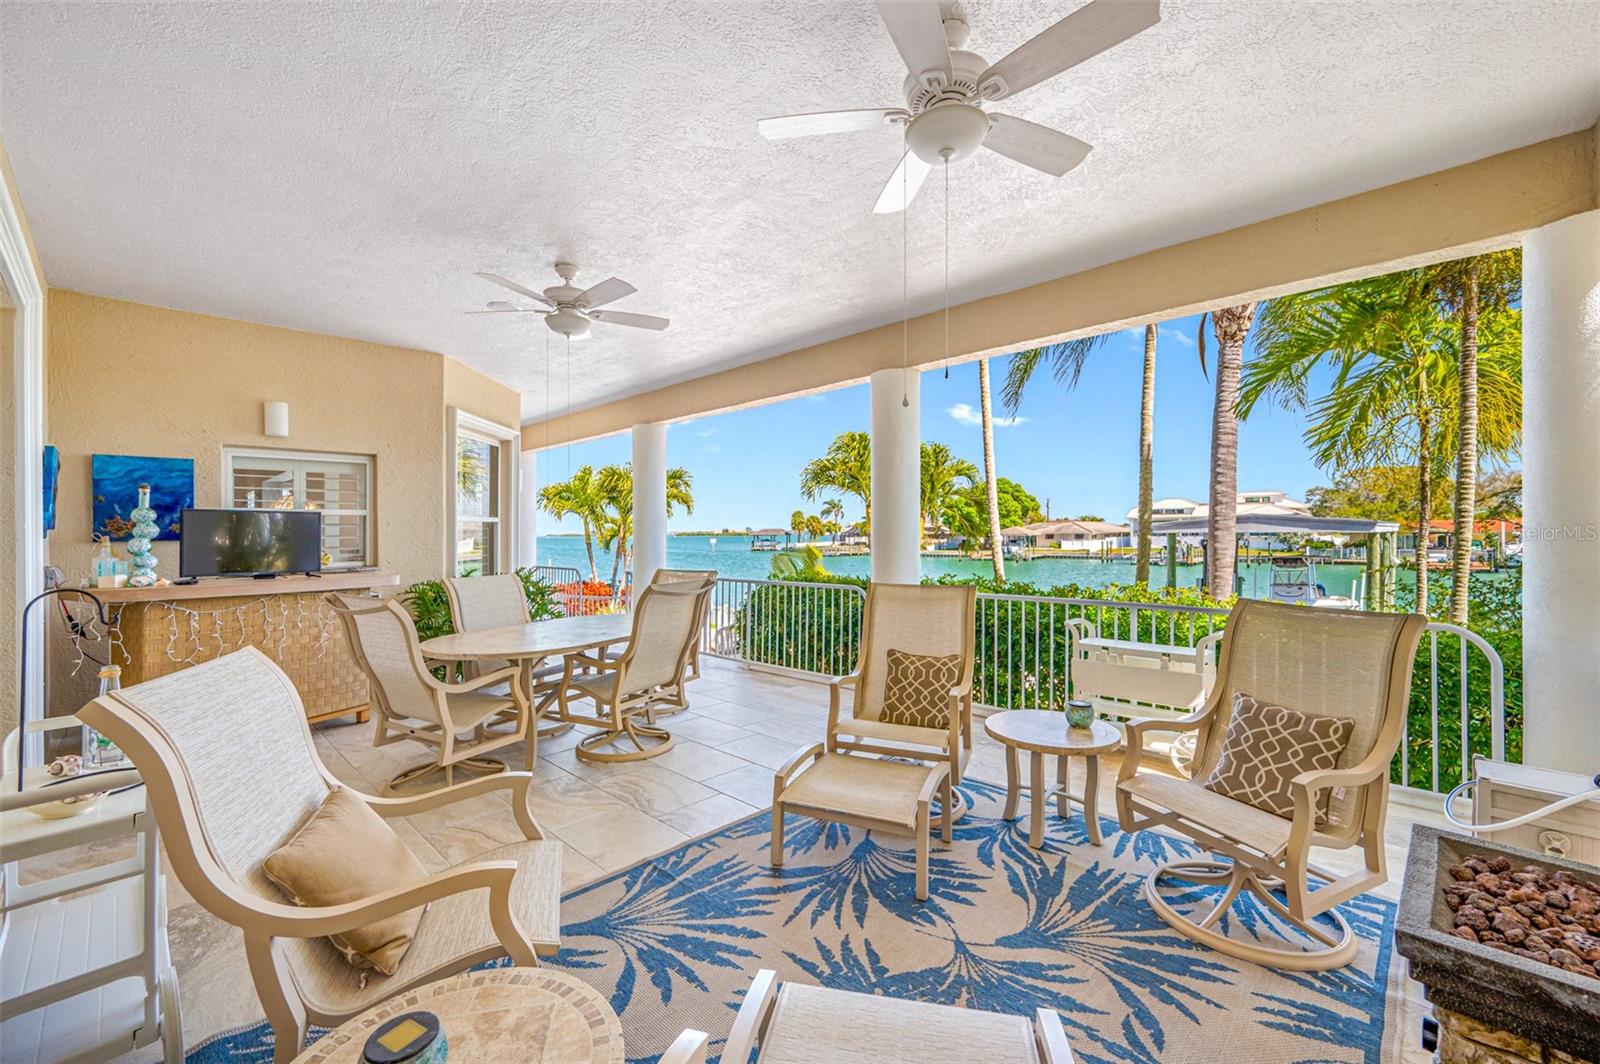 Lanai overlooking the water provides expanded living and entertaining area